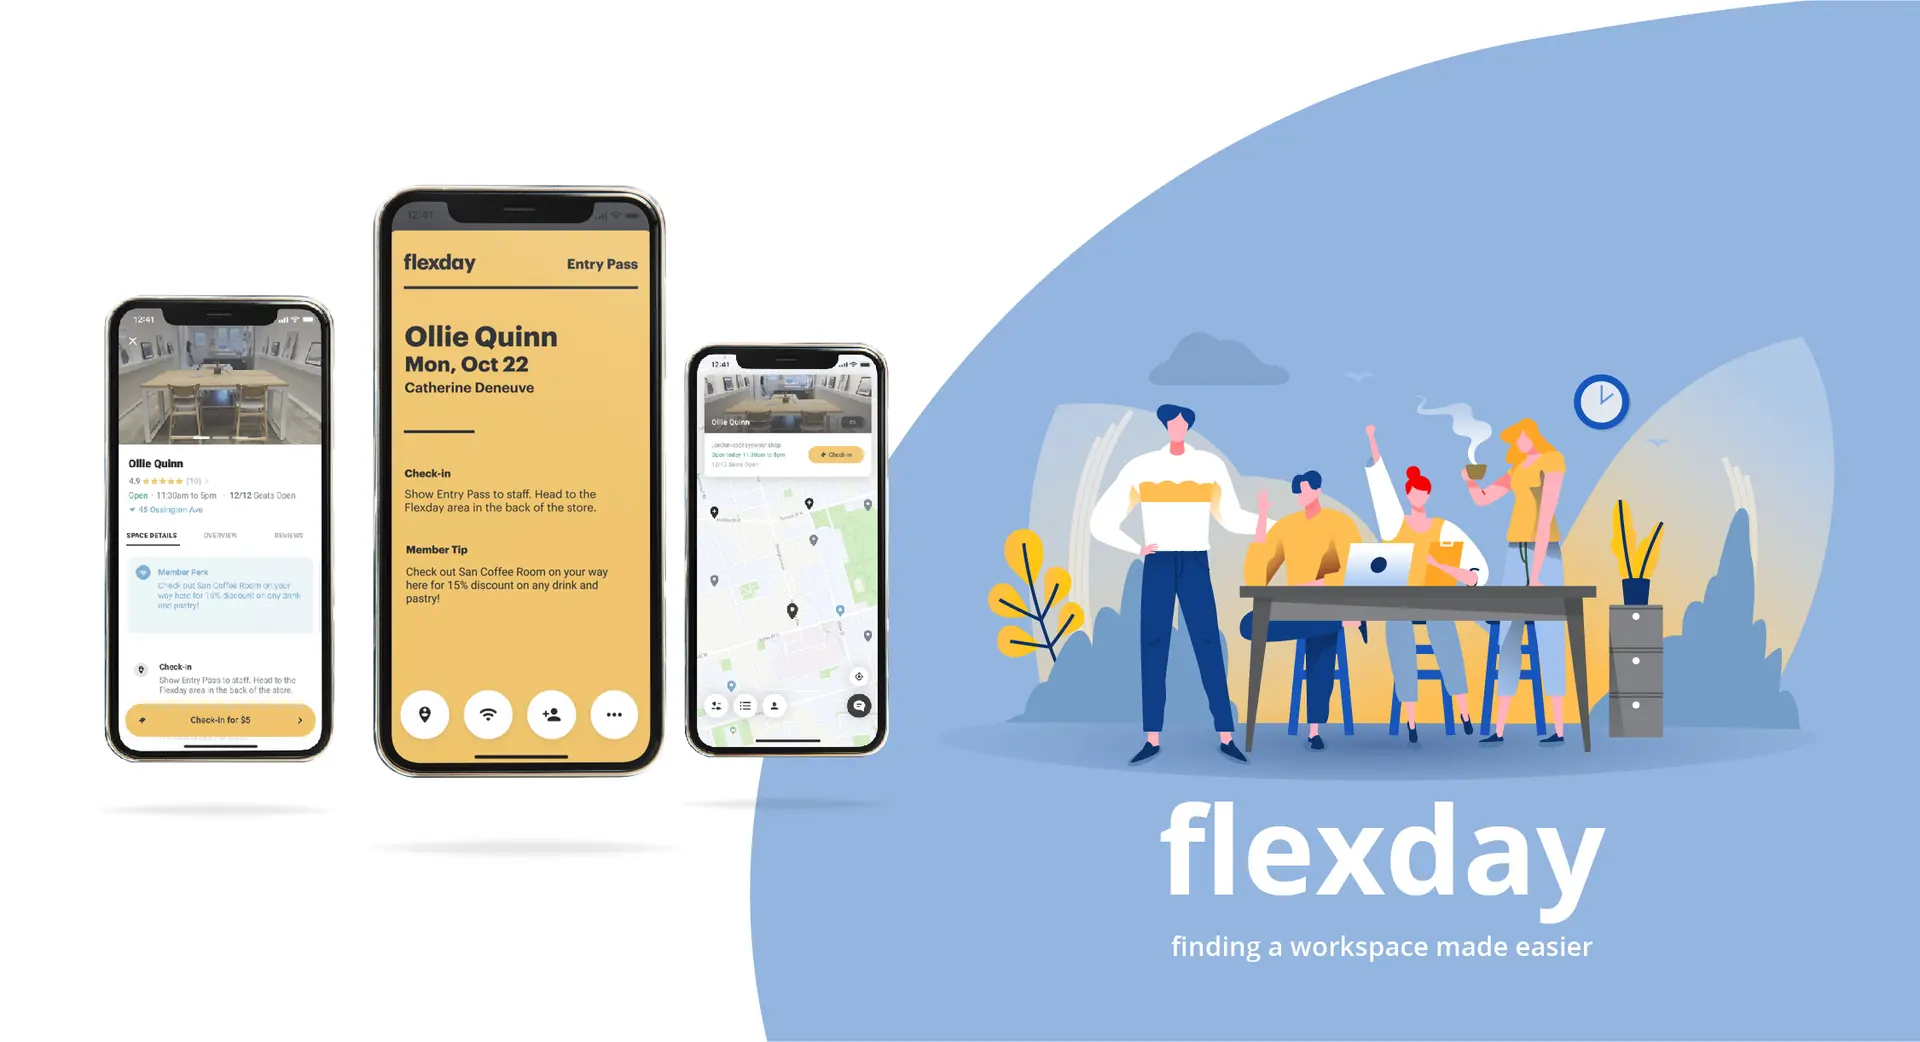 Flexday: More Flexible Coworking Options's image